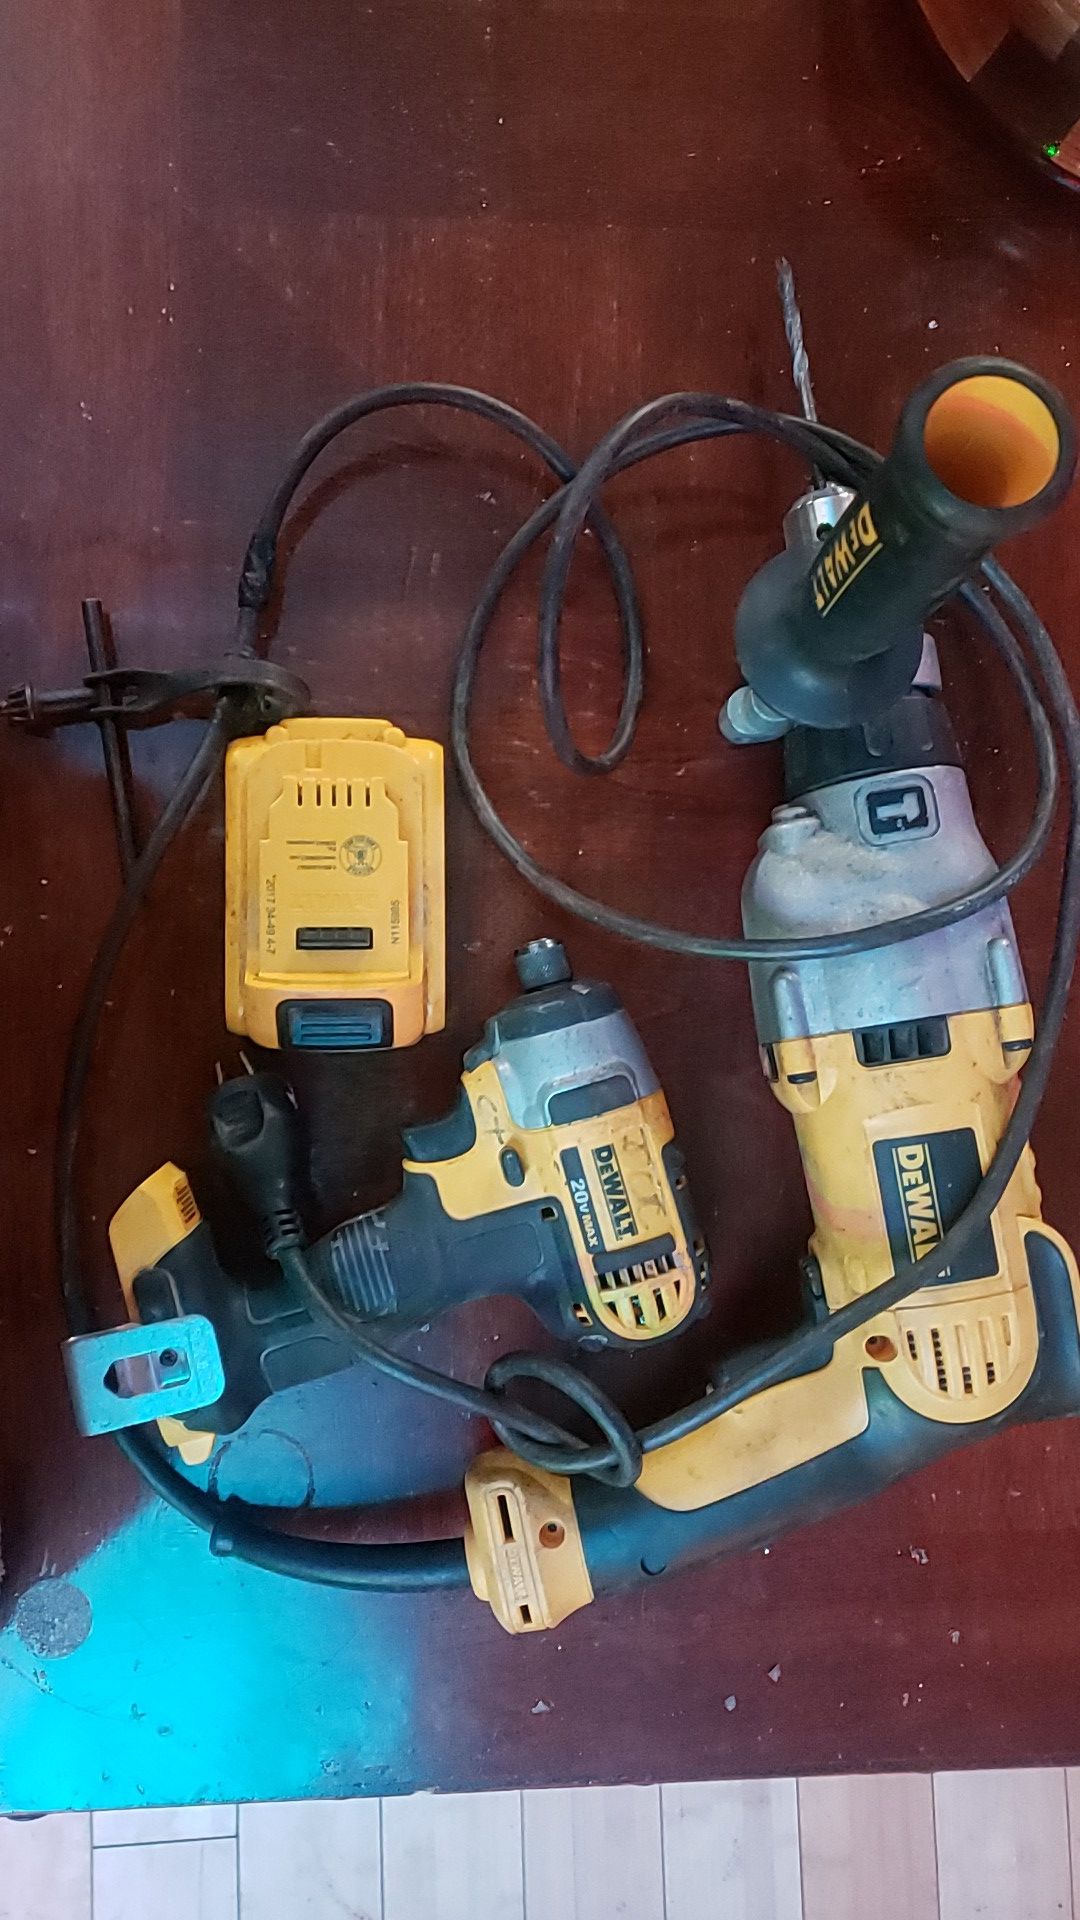 Dewalt drills,Electric hammer drill and 20v impact drill 1 battery an 1 charger